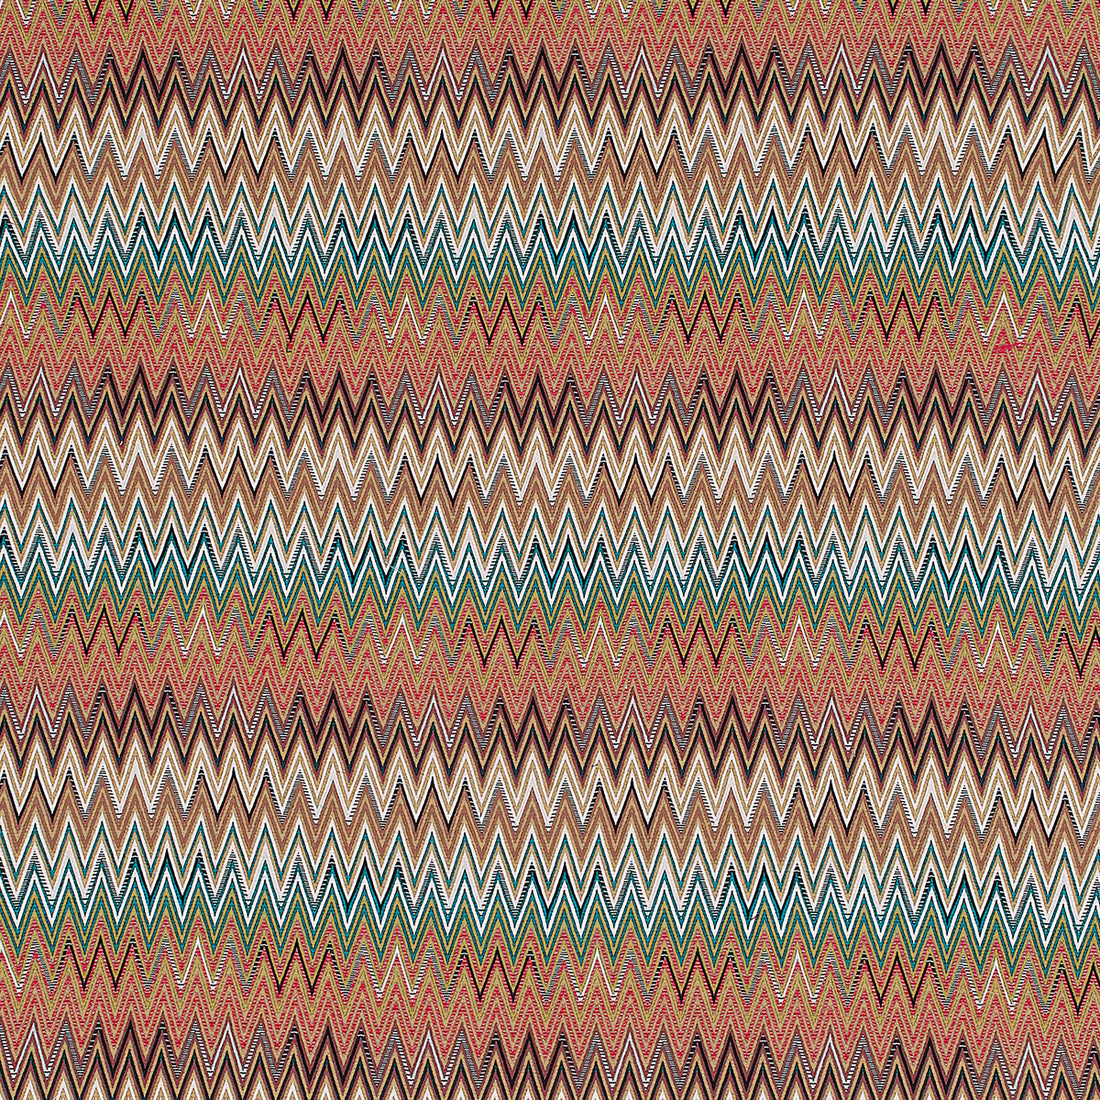 Vitim fabric in 164 color - pattern 36211.635.0 - by Kravet Couture in the Missoni Home collection